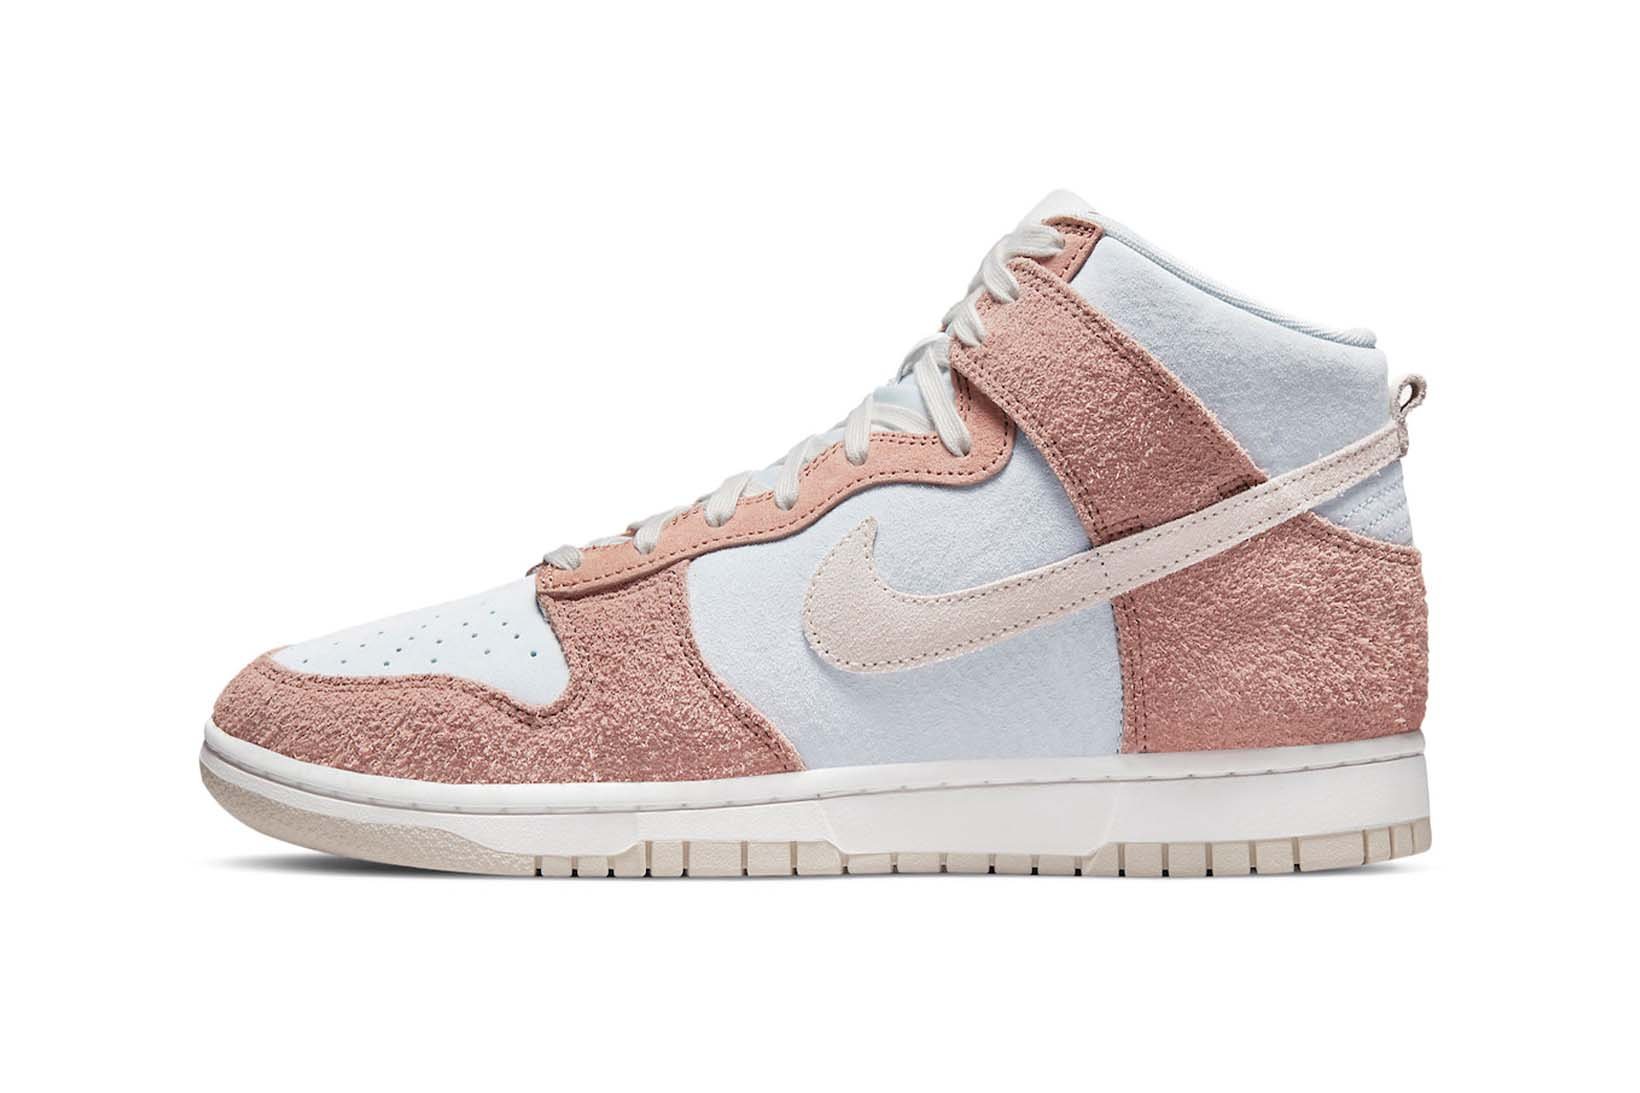 nike-dunk-high-fossil-rose-price-release-date-1.jpg